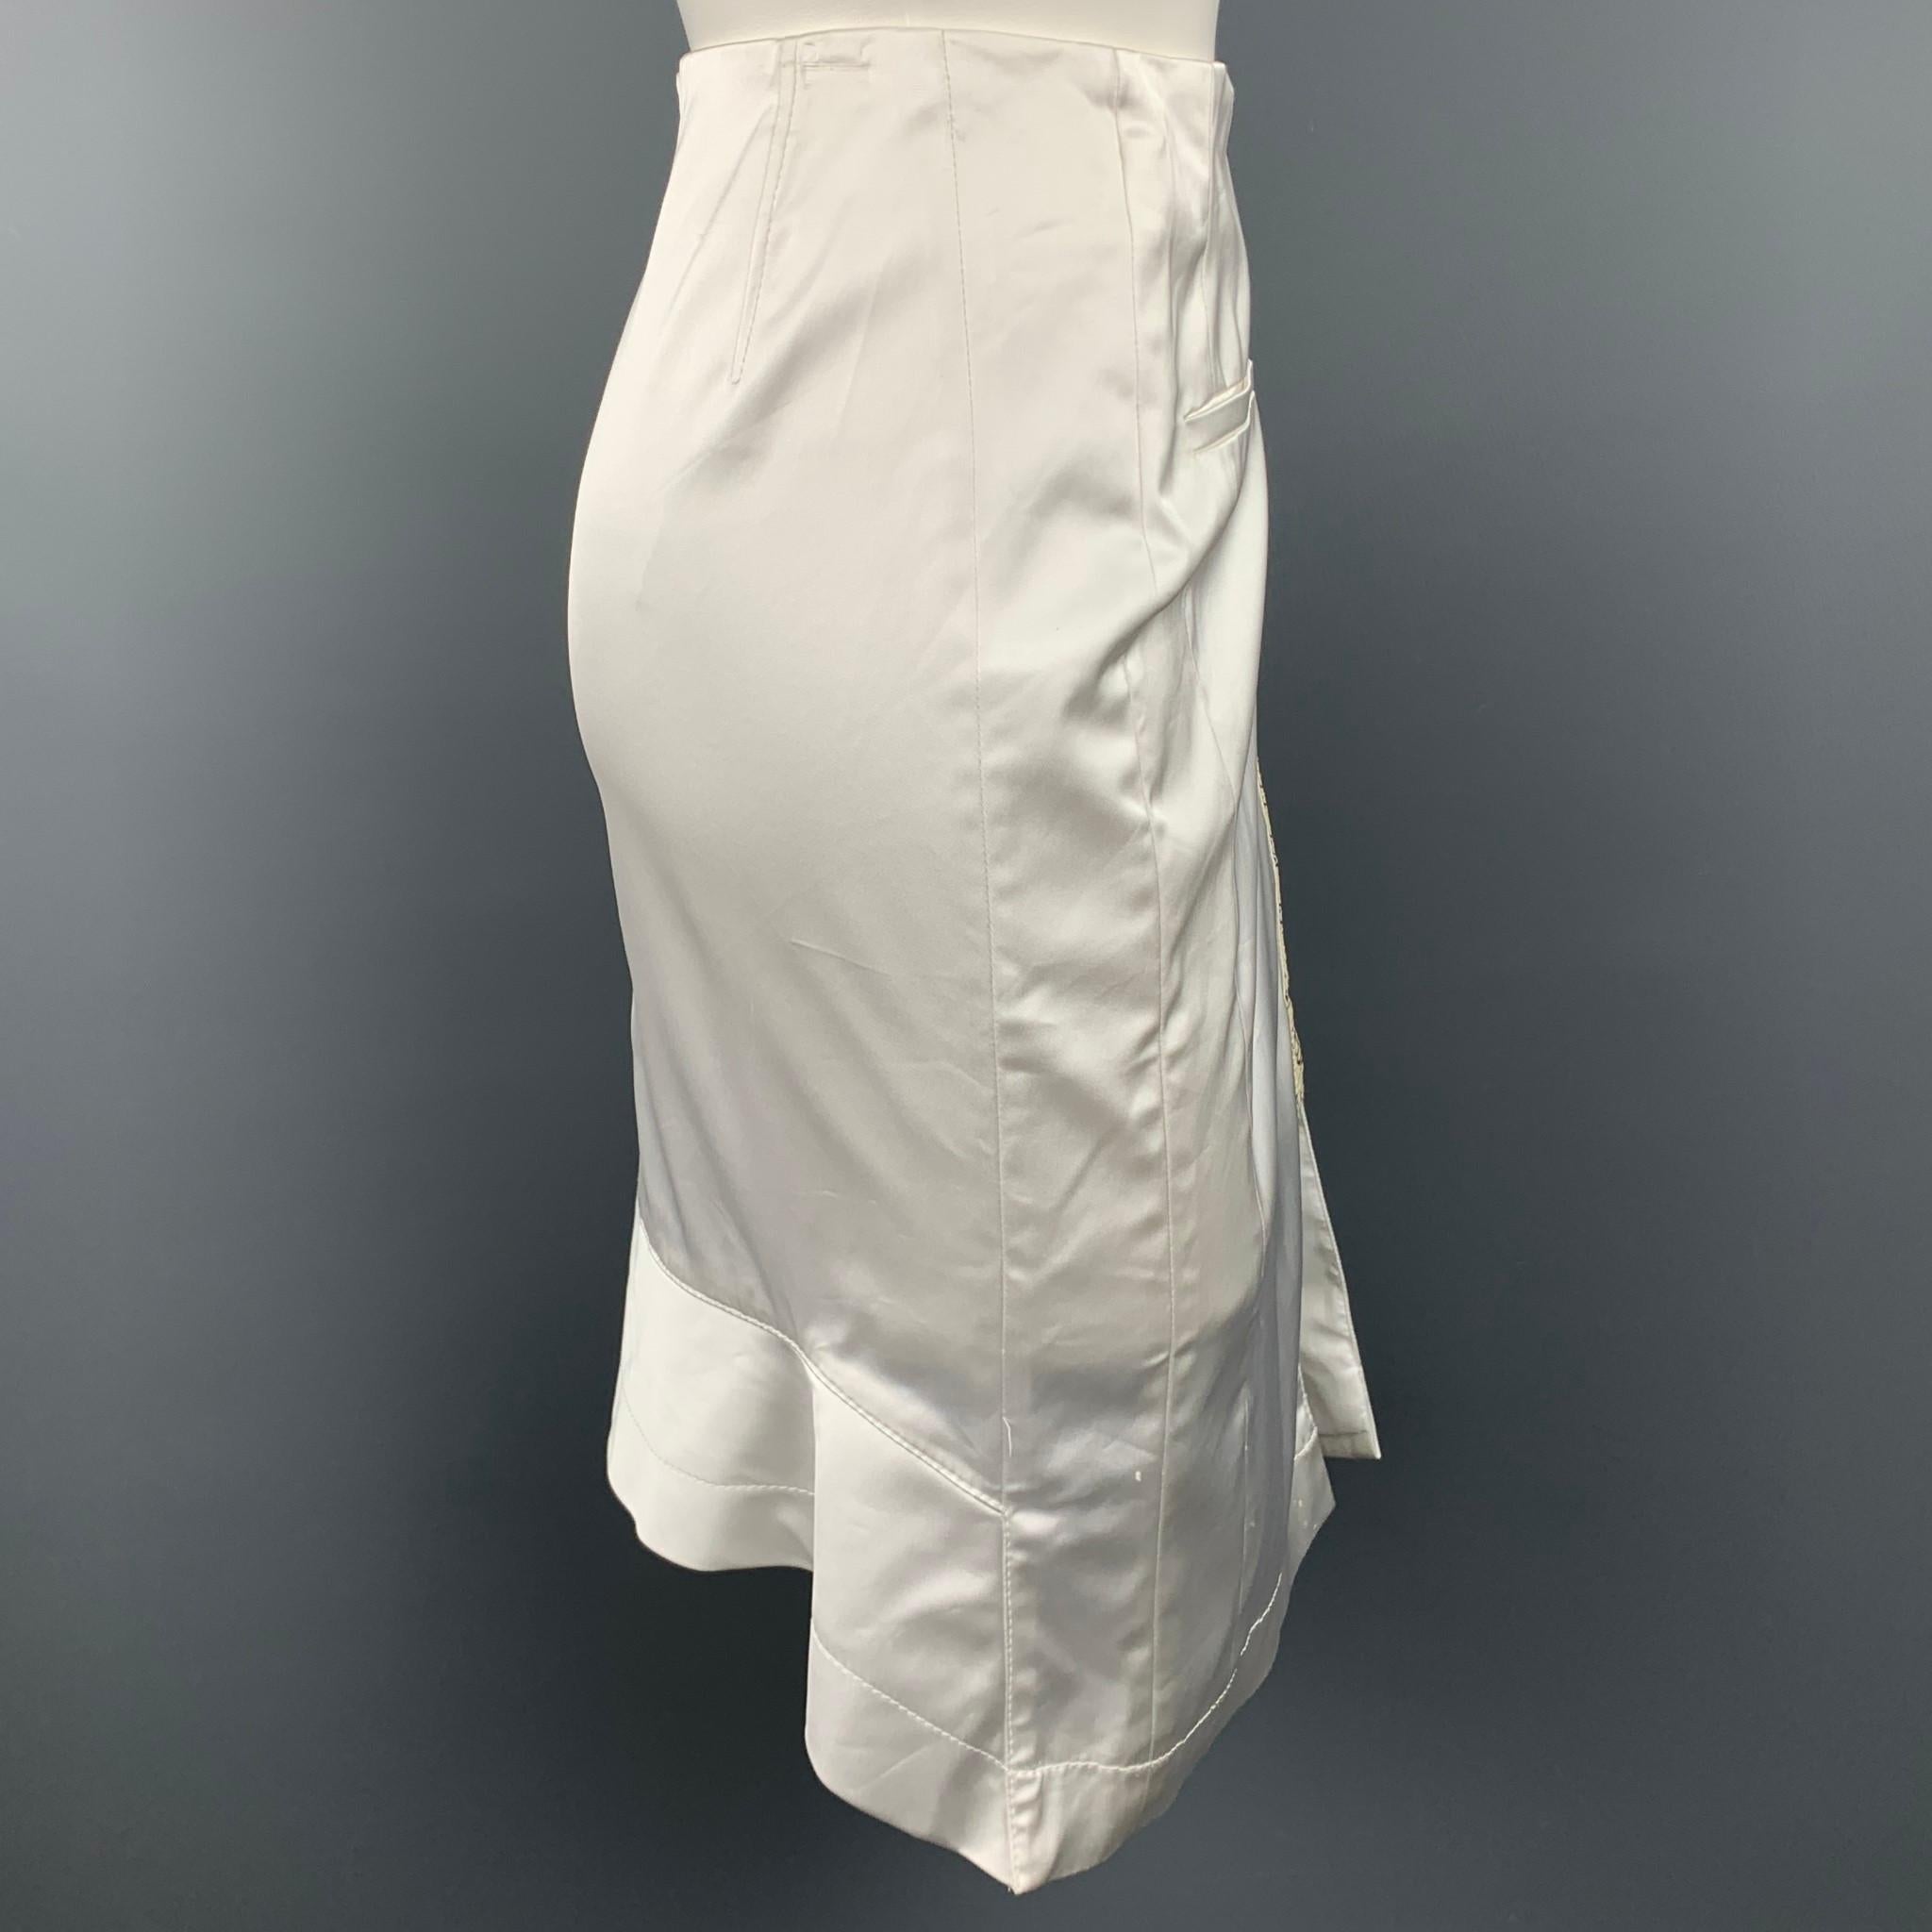 ALTUZARRA skirt comes in a white satin acetate blend with a snake skin trim featuring a pencil style and a back zip up closure. Minor discoloration. As-Is. Made in Italy.

Good Pre-Owned Condition.
Marked: 10

Measurements:

Waist: 33 in. 
Hip: 42